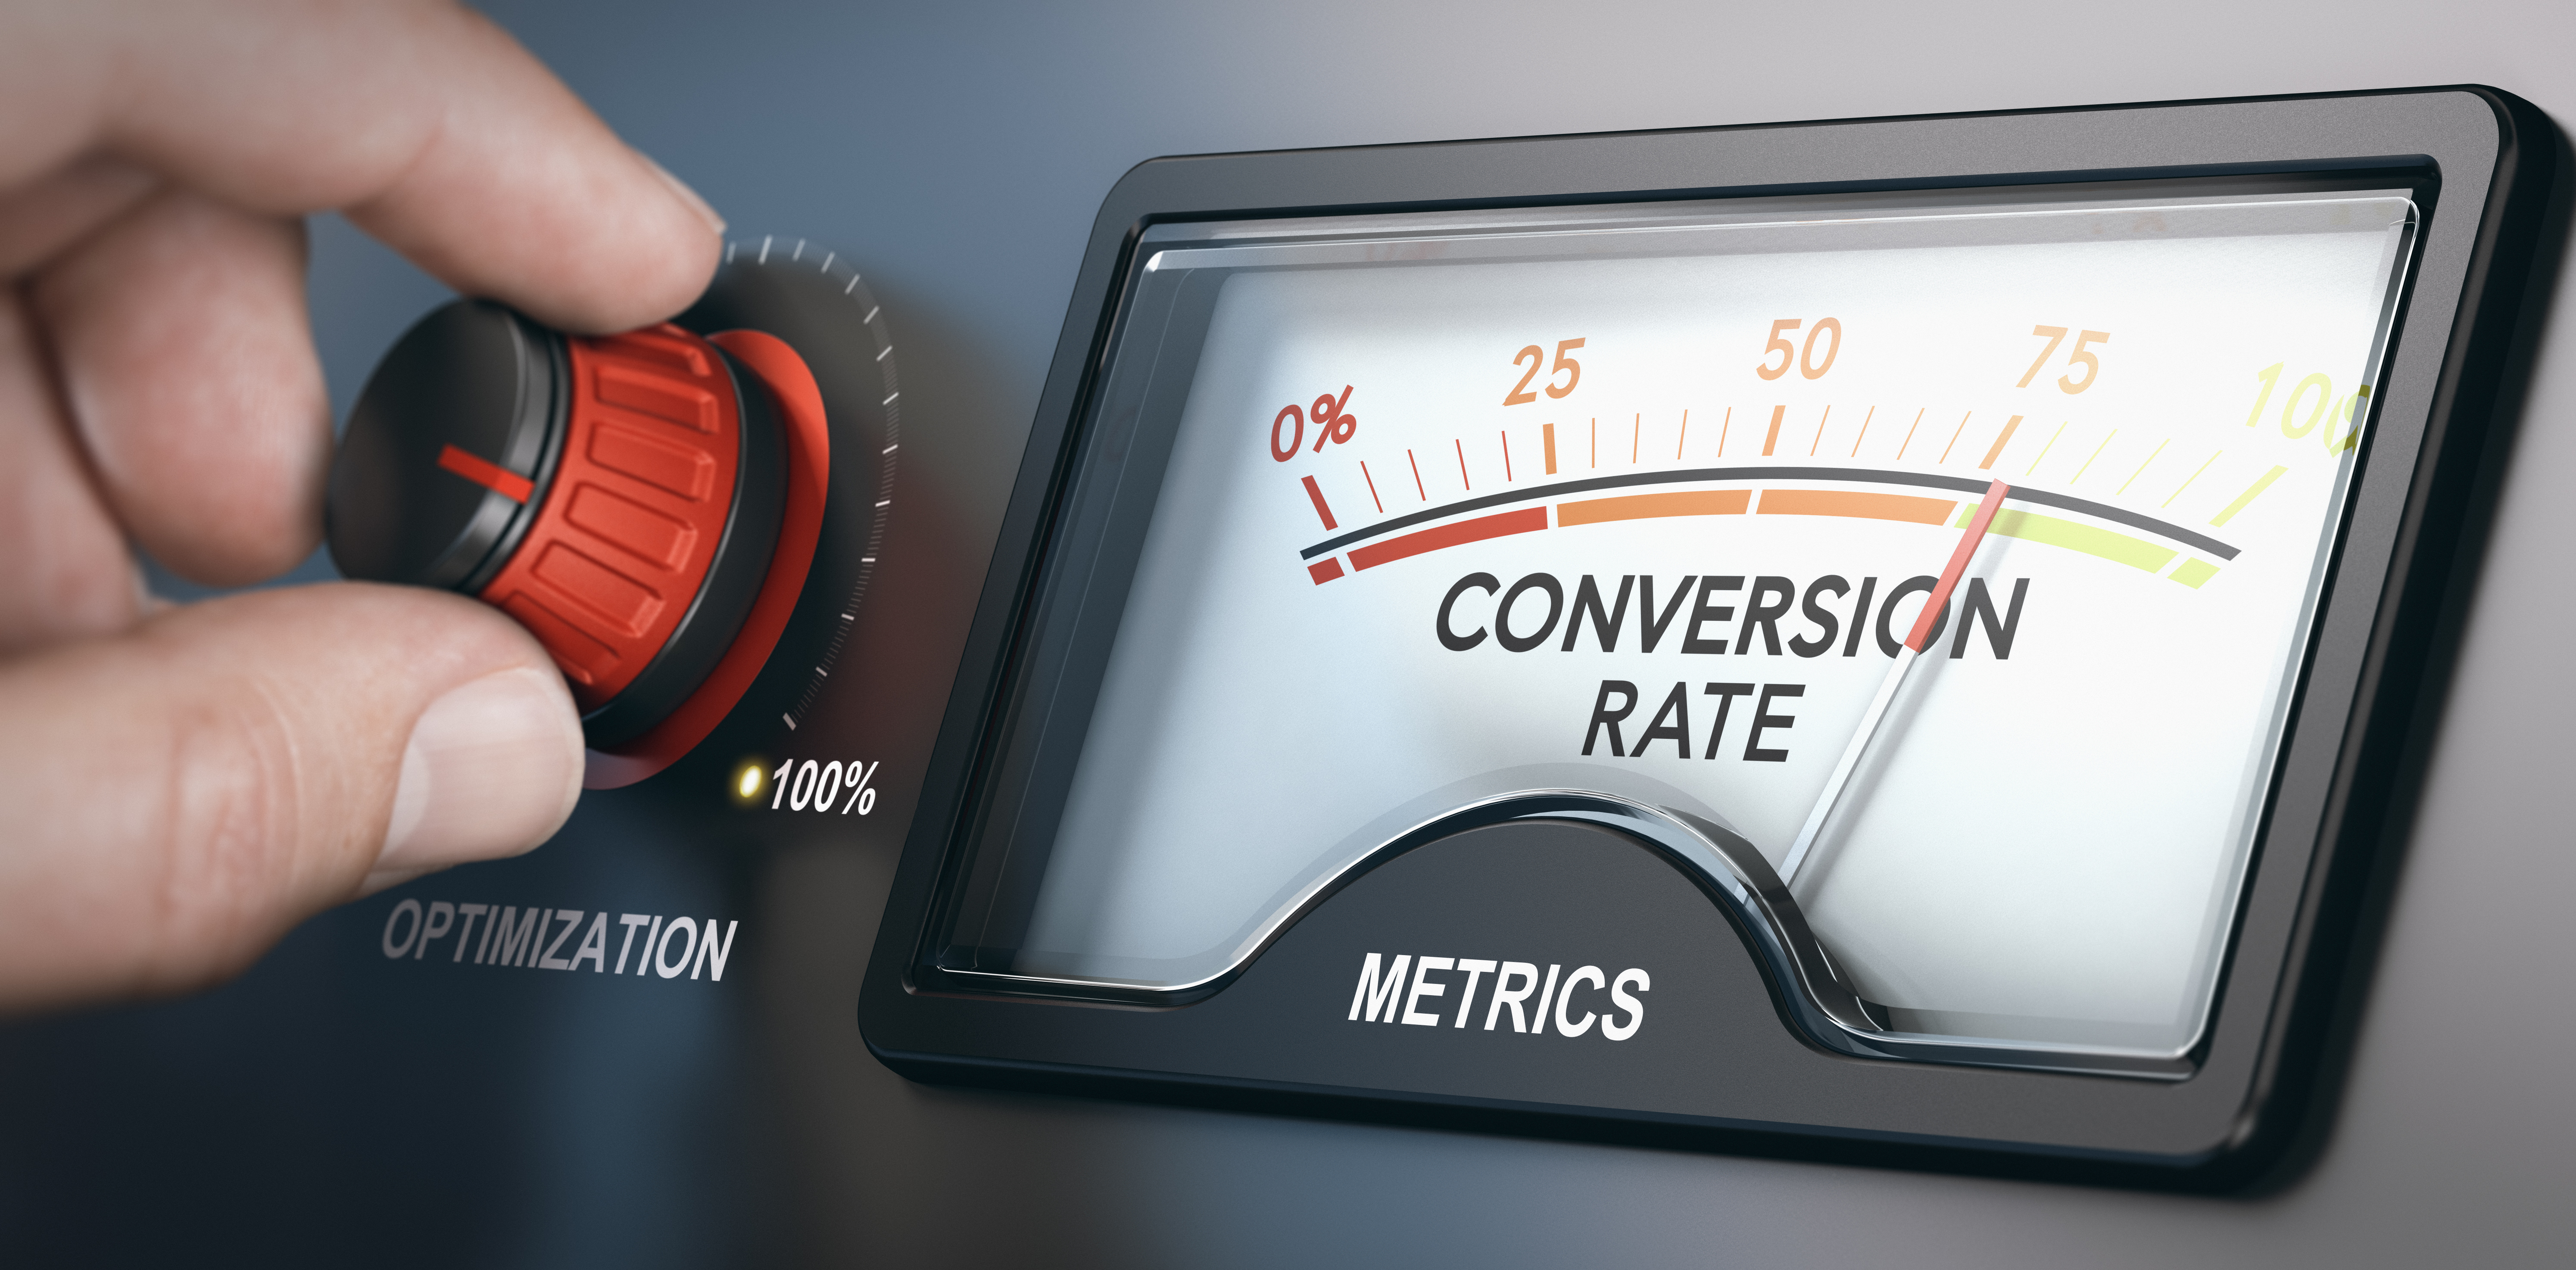 conversion rate in digital marketing, conversion rate